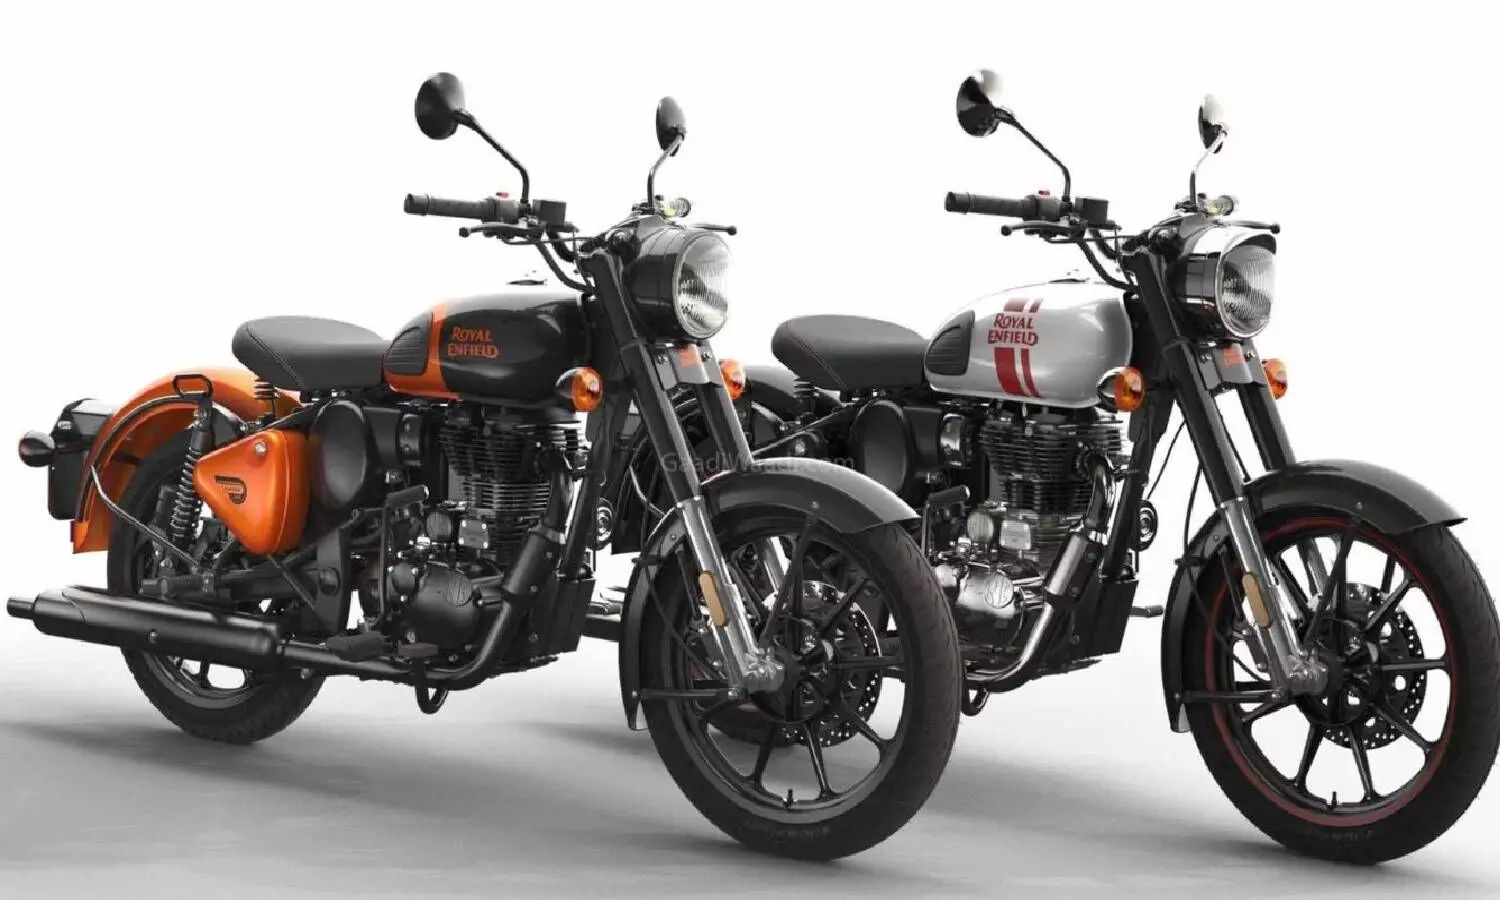 Royal Enfield gearing to fortify its market base in Telangana